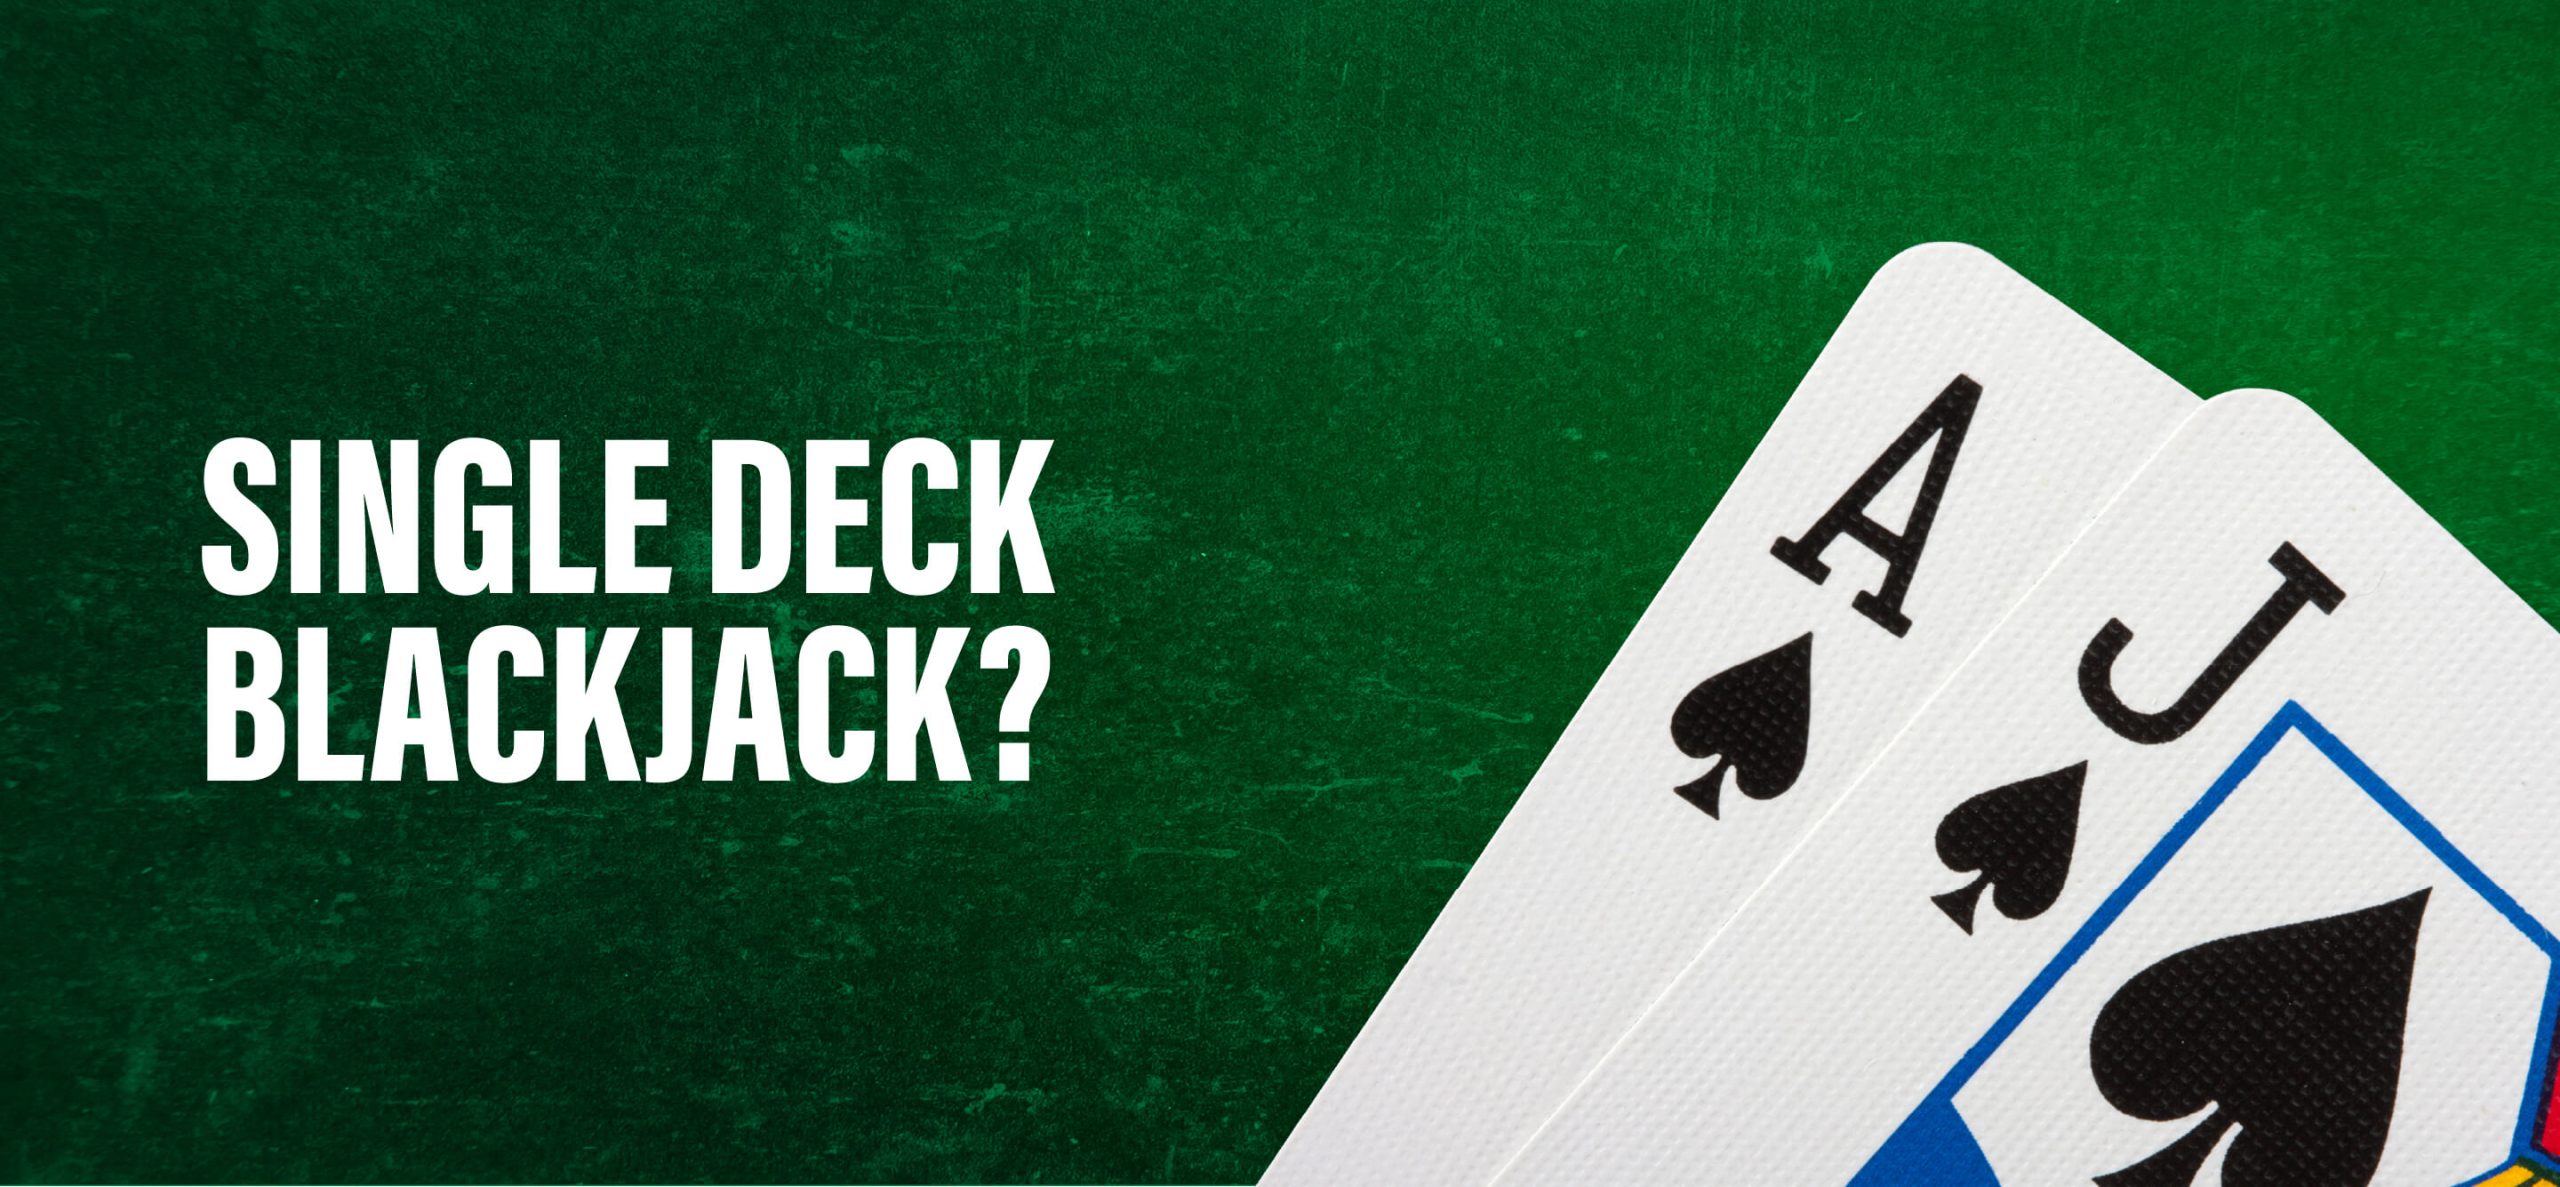 While Blackjack is one of the most popular games not only at Bodog, but in the world, there are more than one version. So why, then, should you play single deck blackjack? Read on to find out.